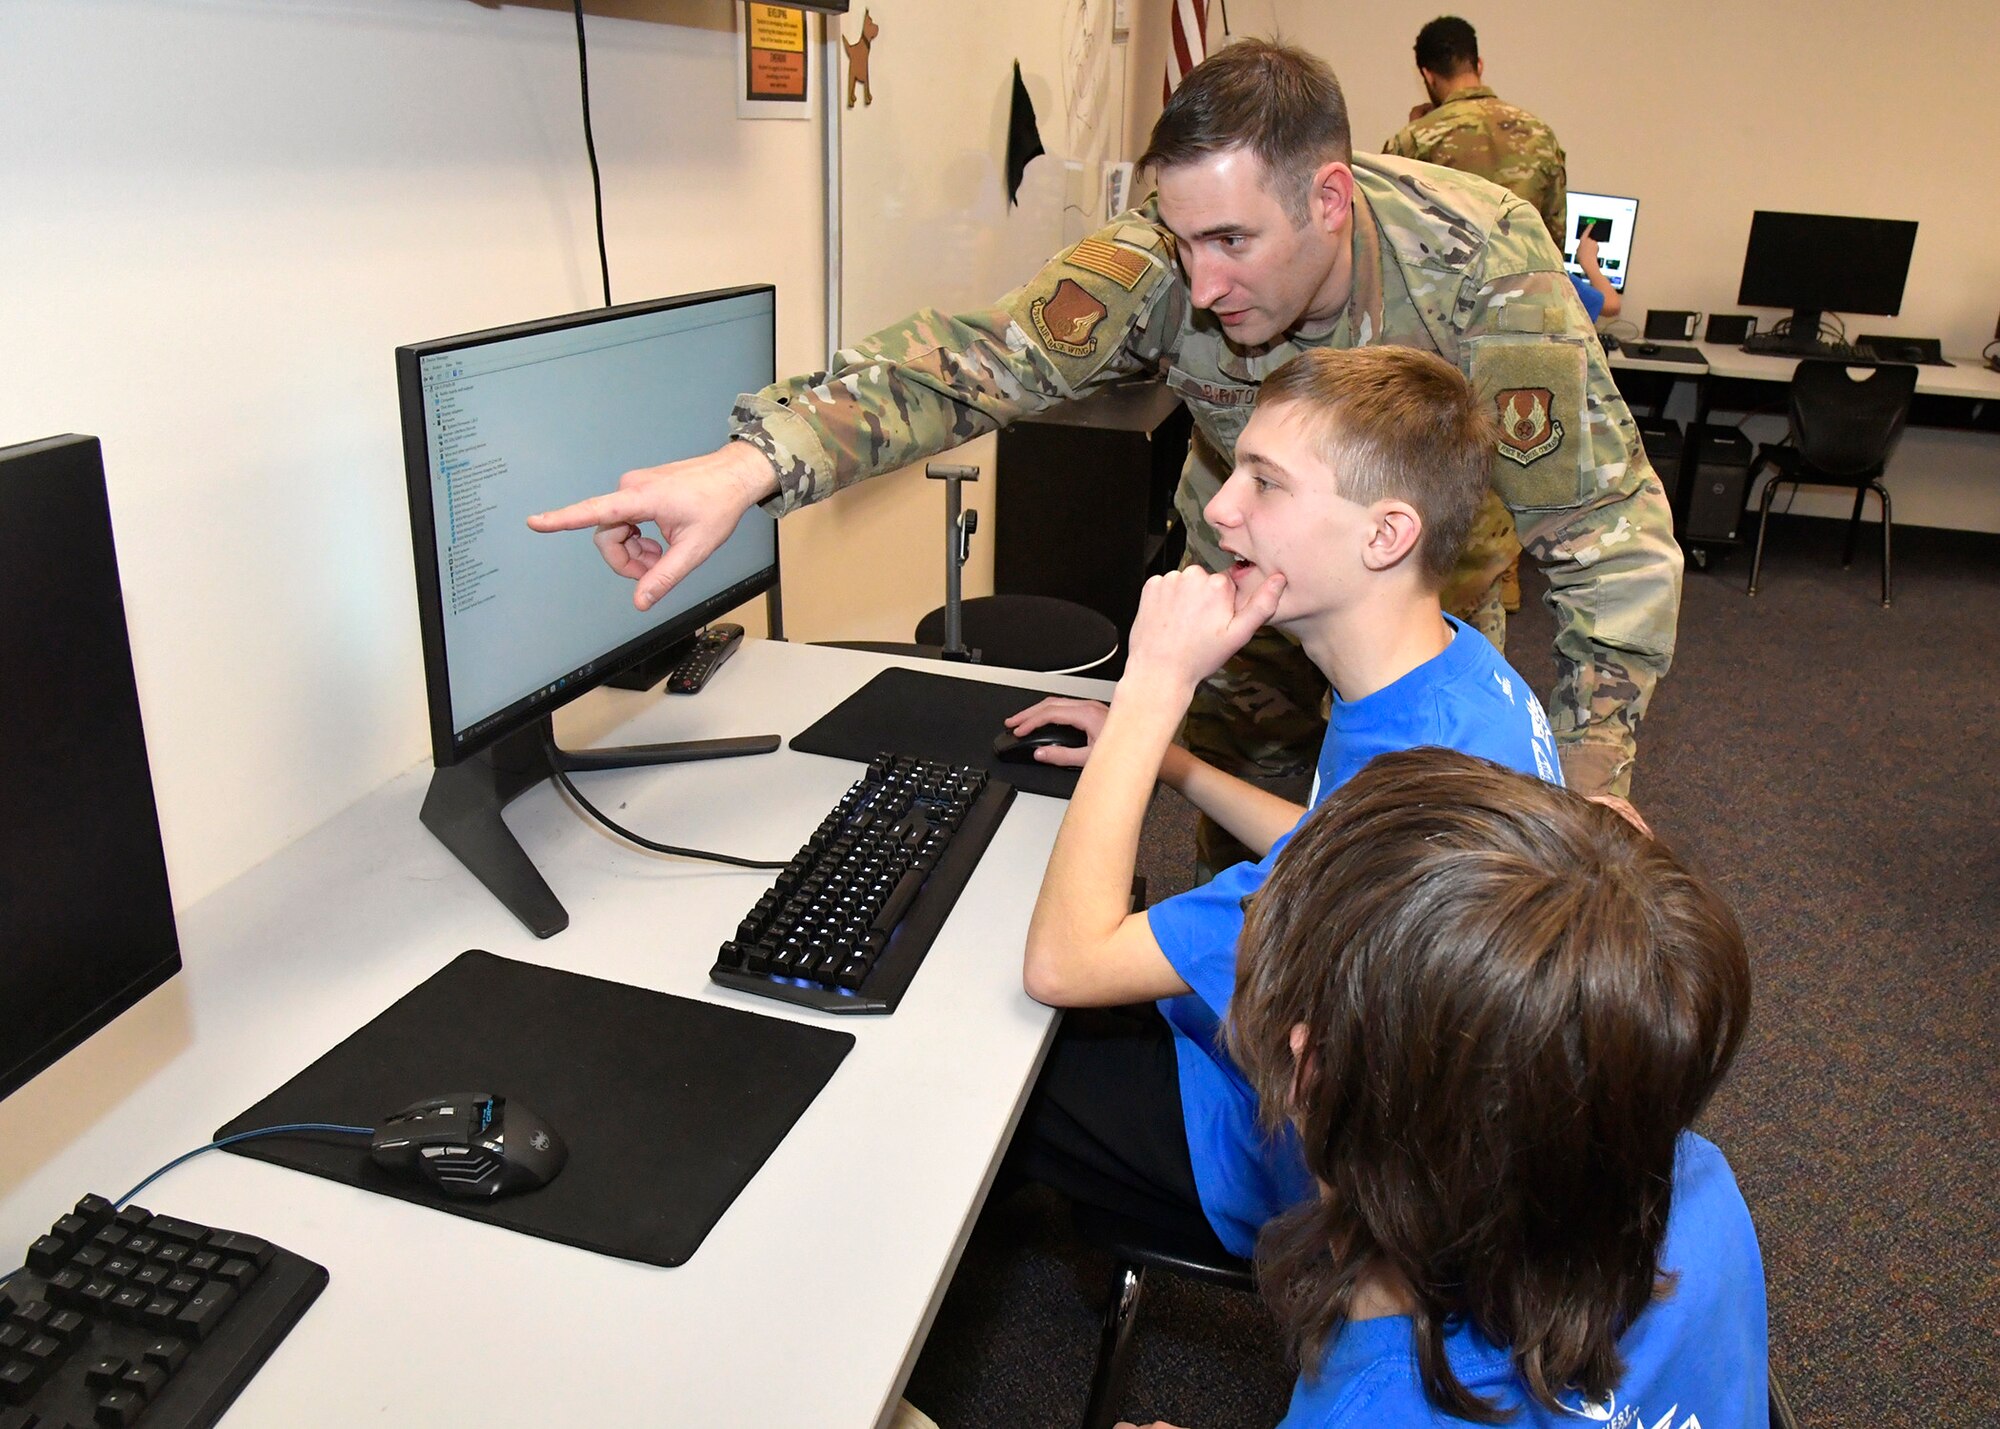 Master Sgt. Jarred Dirito, Flight Chief network infrastructure, 75th Communication and Information Directorate, reviews an image with students Feb. 14, 2024, at Quest Academy Charter School in West Haven, Utah. The student team recently competed in the National Youth Cyber Defense Competition, the nation's largest that puts middle and high school students in charge of securing a simulated virtual network. The middle school team placed first in the state of Utah this year, which was in the top 11% nationally of the state finals competition and in the top 15% nationally in the national semi-finals.